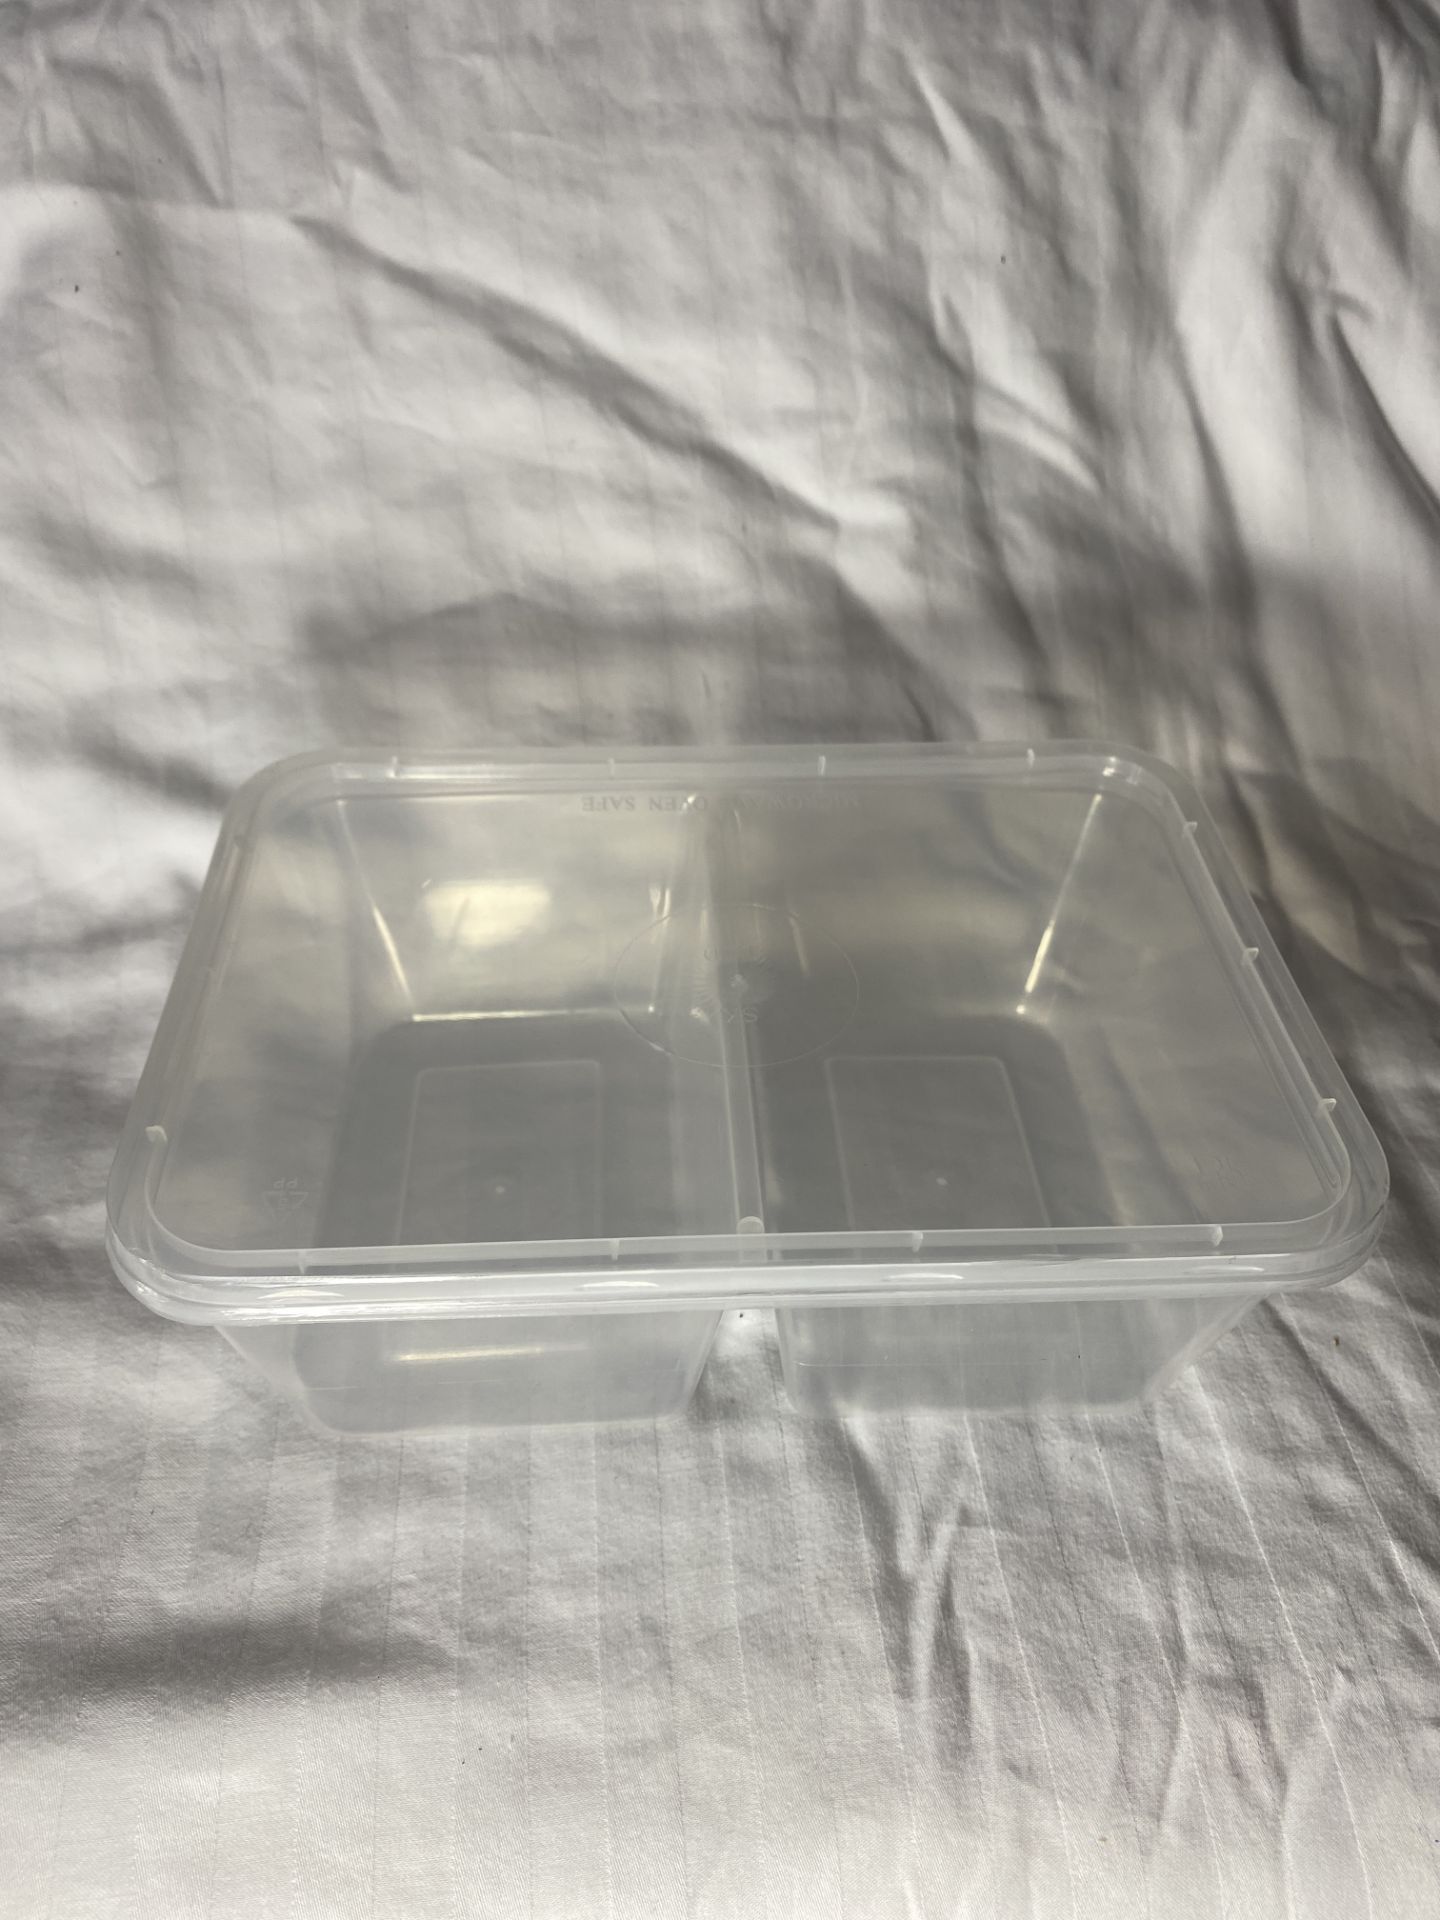 5 x Boxes of Dual Compartment Containers with lid by Ideal Kitchenware - Image 3 of 5